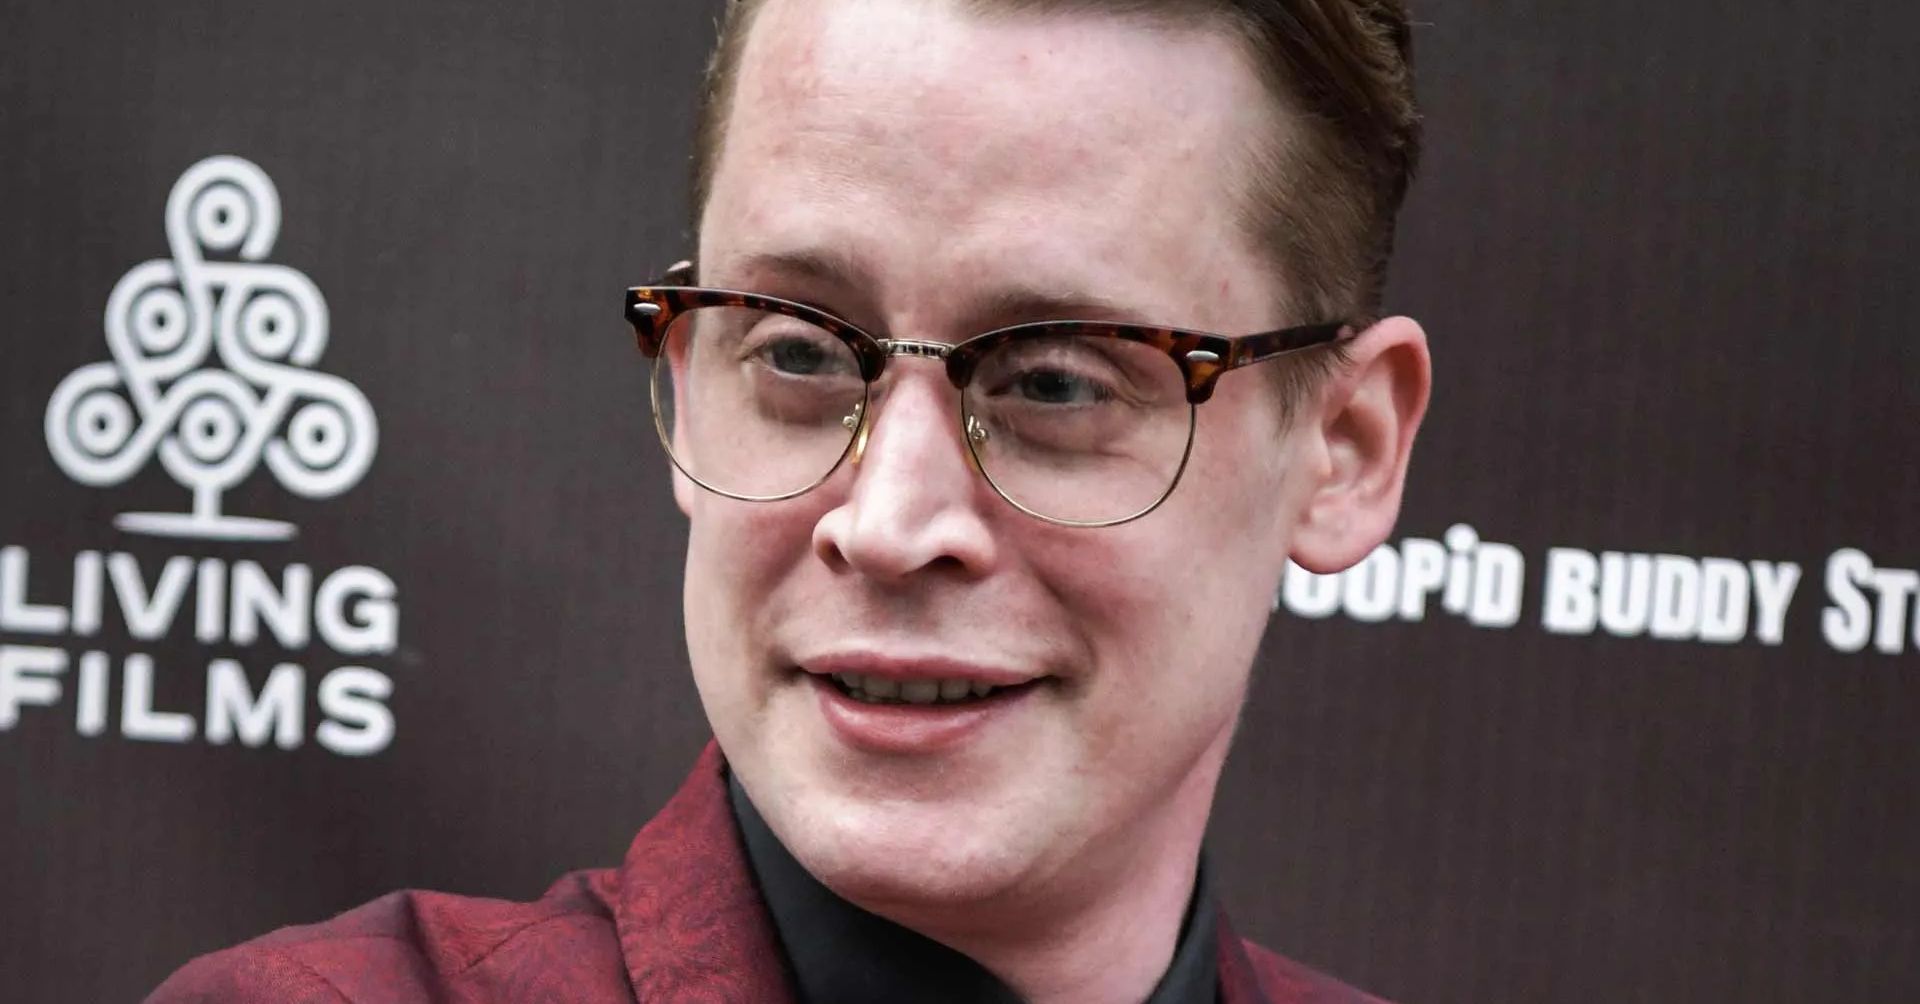 Macaulay Culkin Wants Disney to Call About 'Home Alone' Reboot